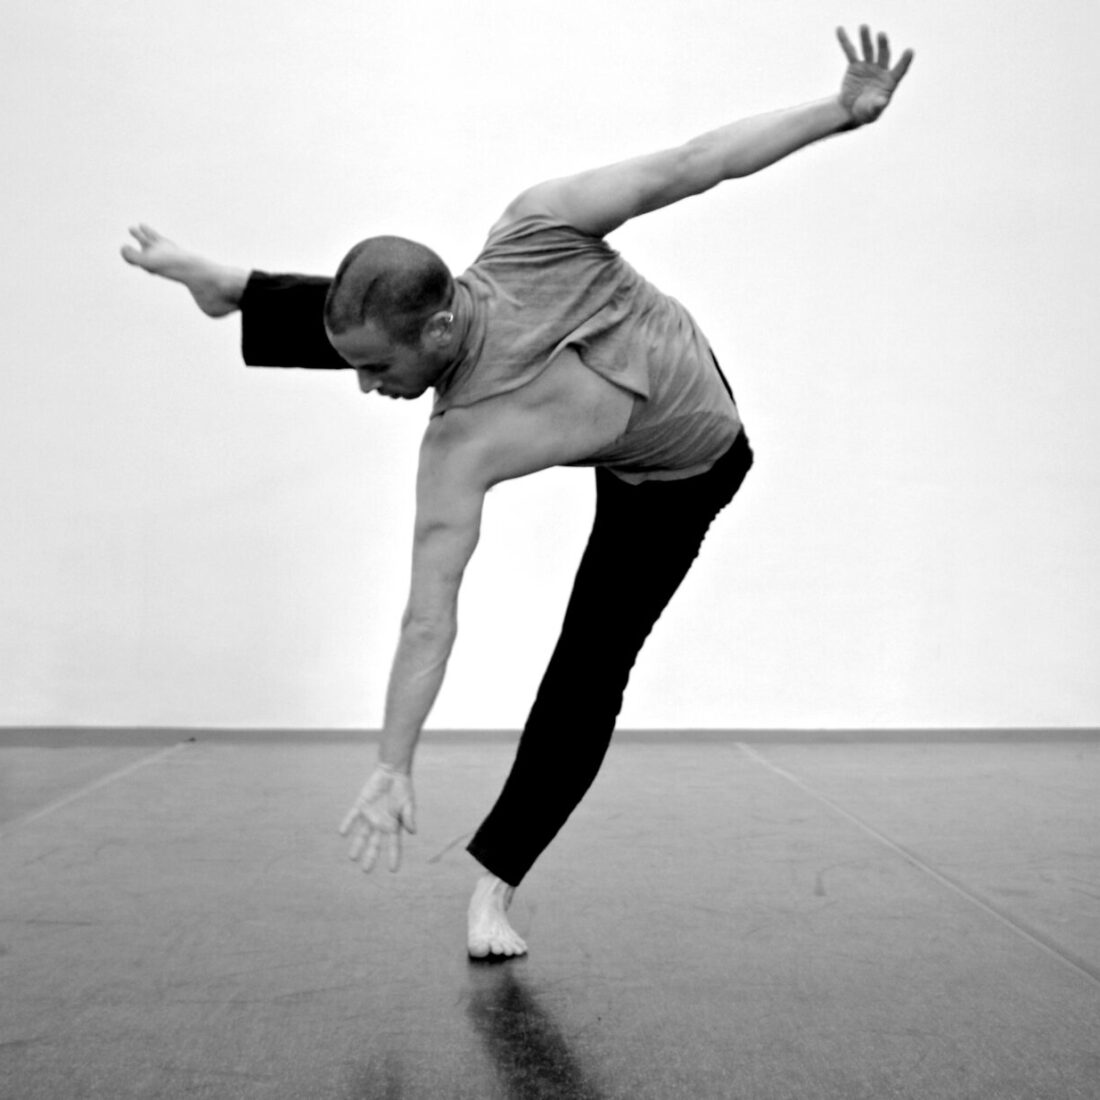 Choreographer and political activist Oded Ronen. Photo by Emma Fishwick